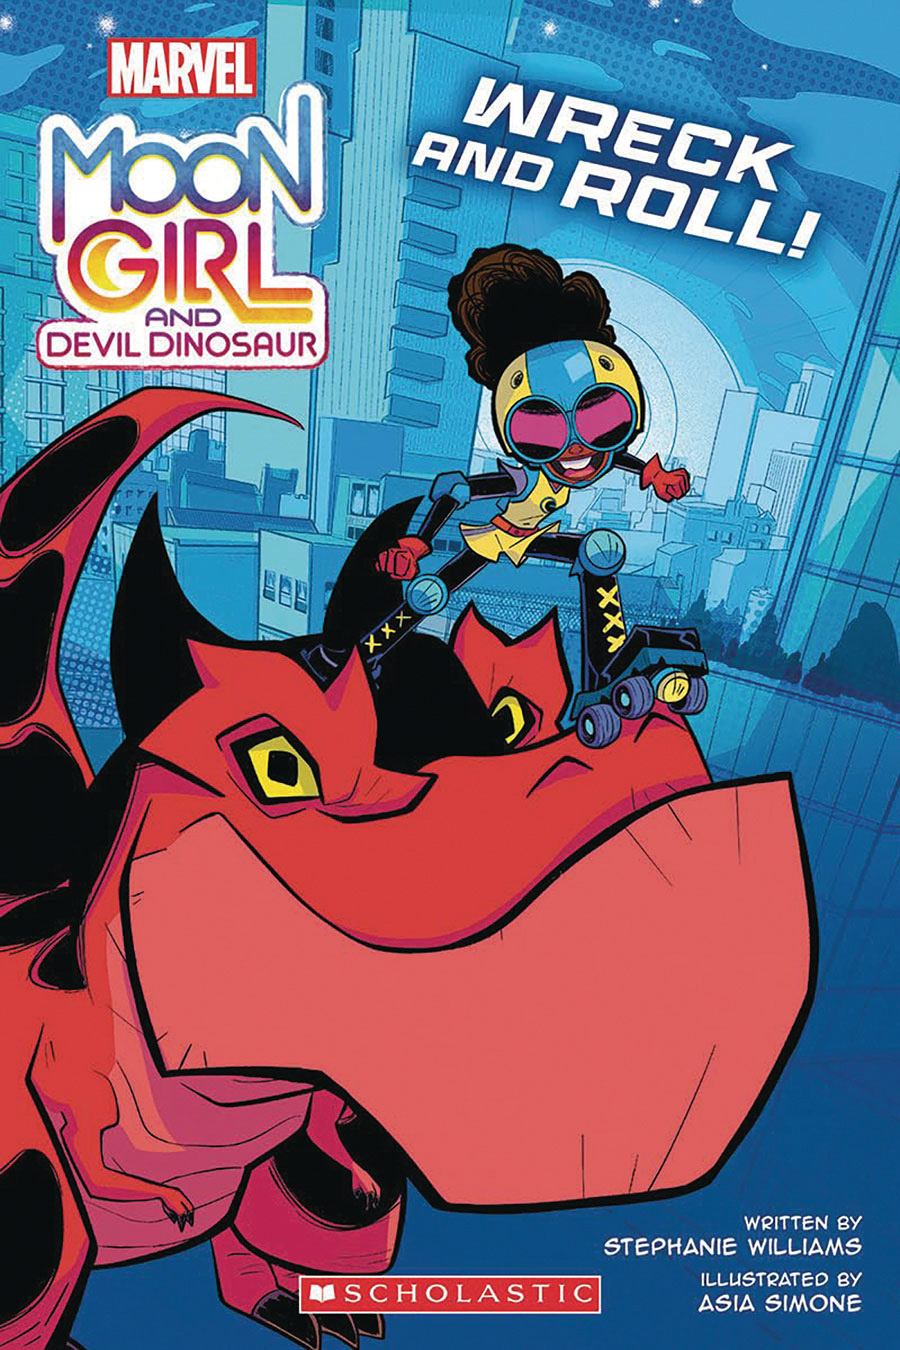 Moon Girl And Devil Dinosaur Wreck And Roll Original Graphic Novel TP